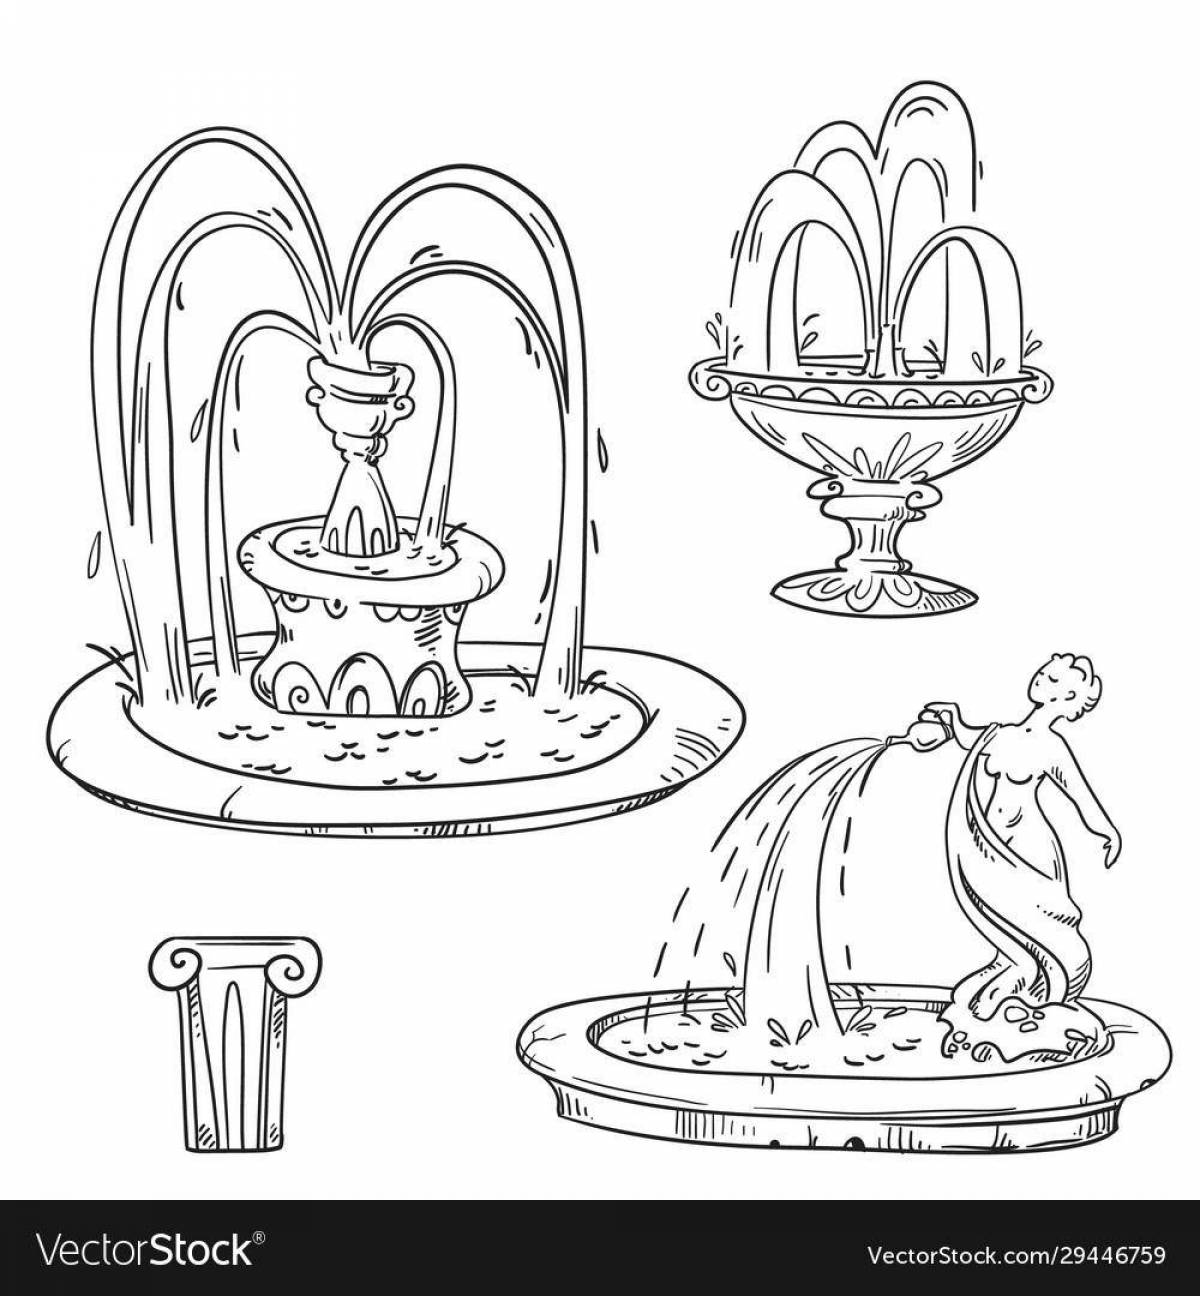 Exquisite fountain coloring pages for kids